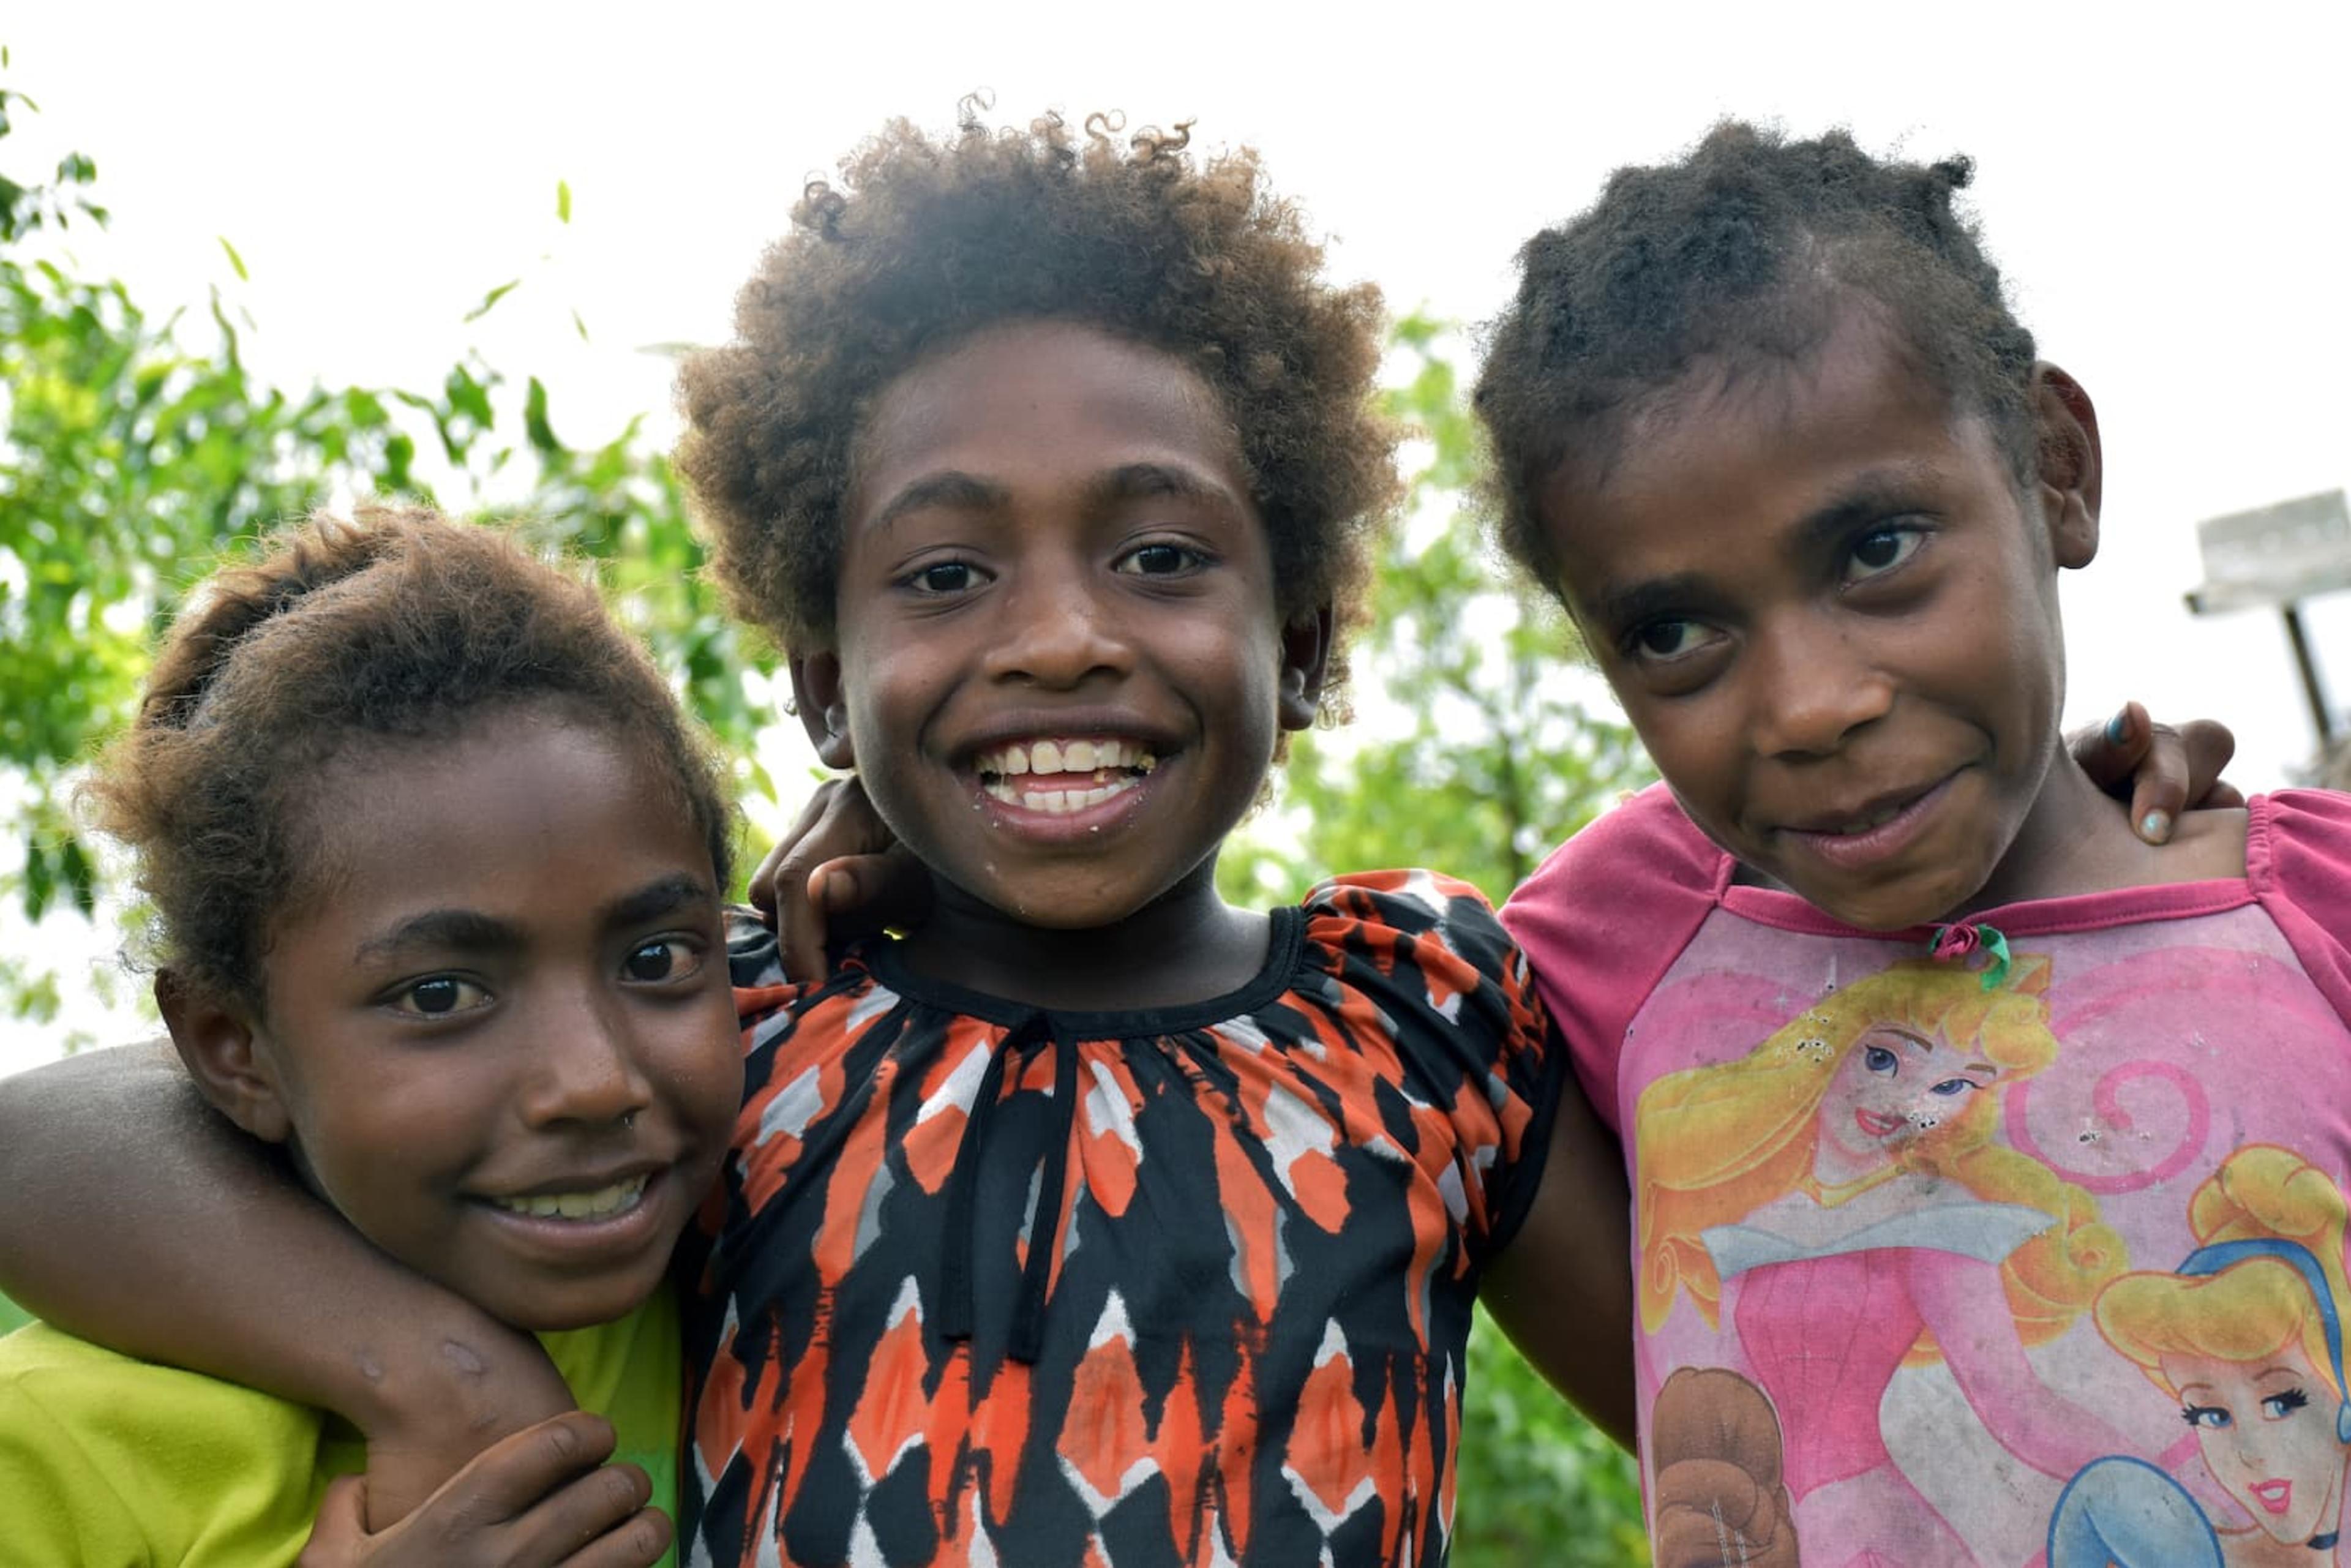 Nowo, Nalam and Angela benefit from the water project in Vanuatu